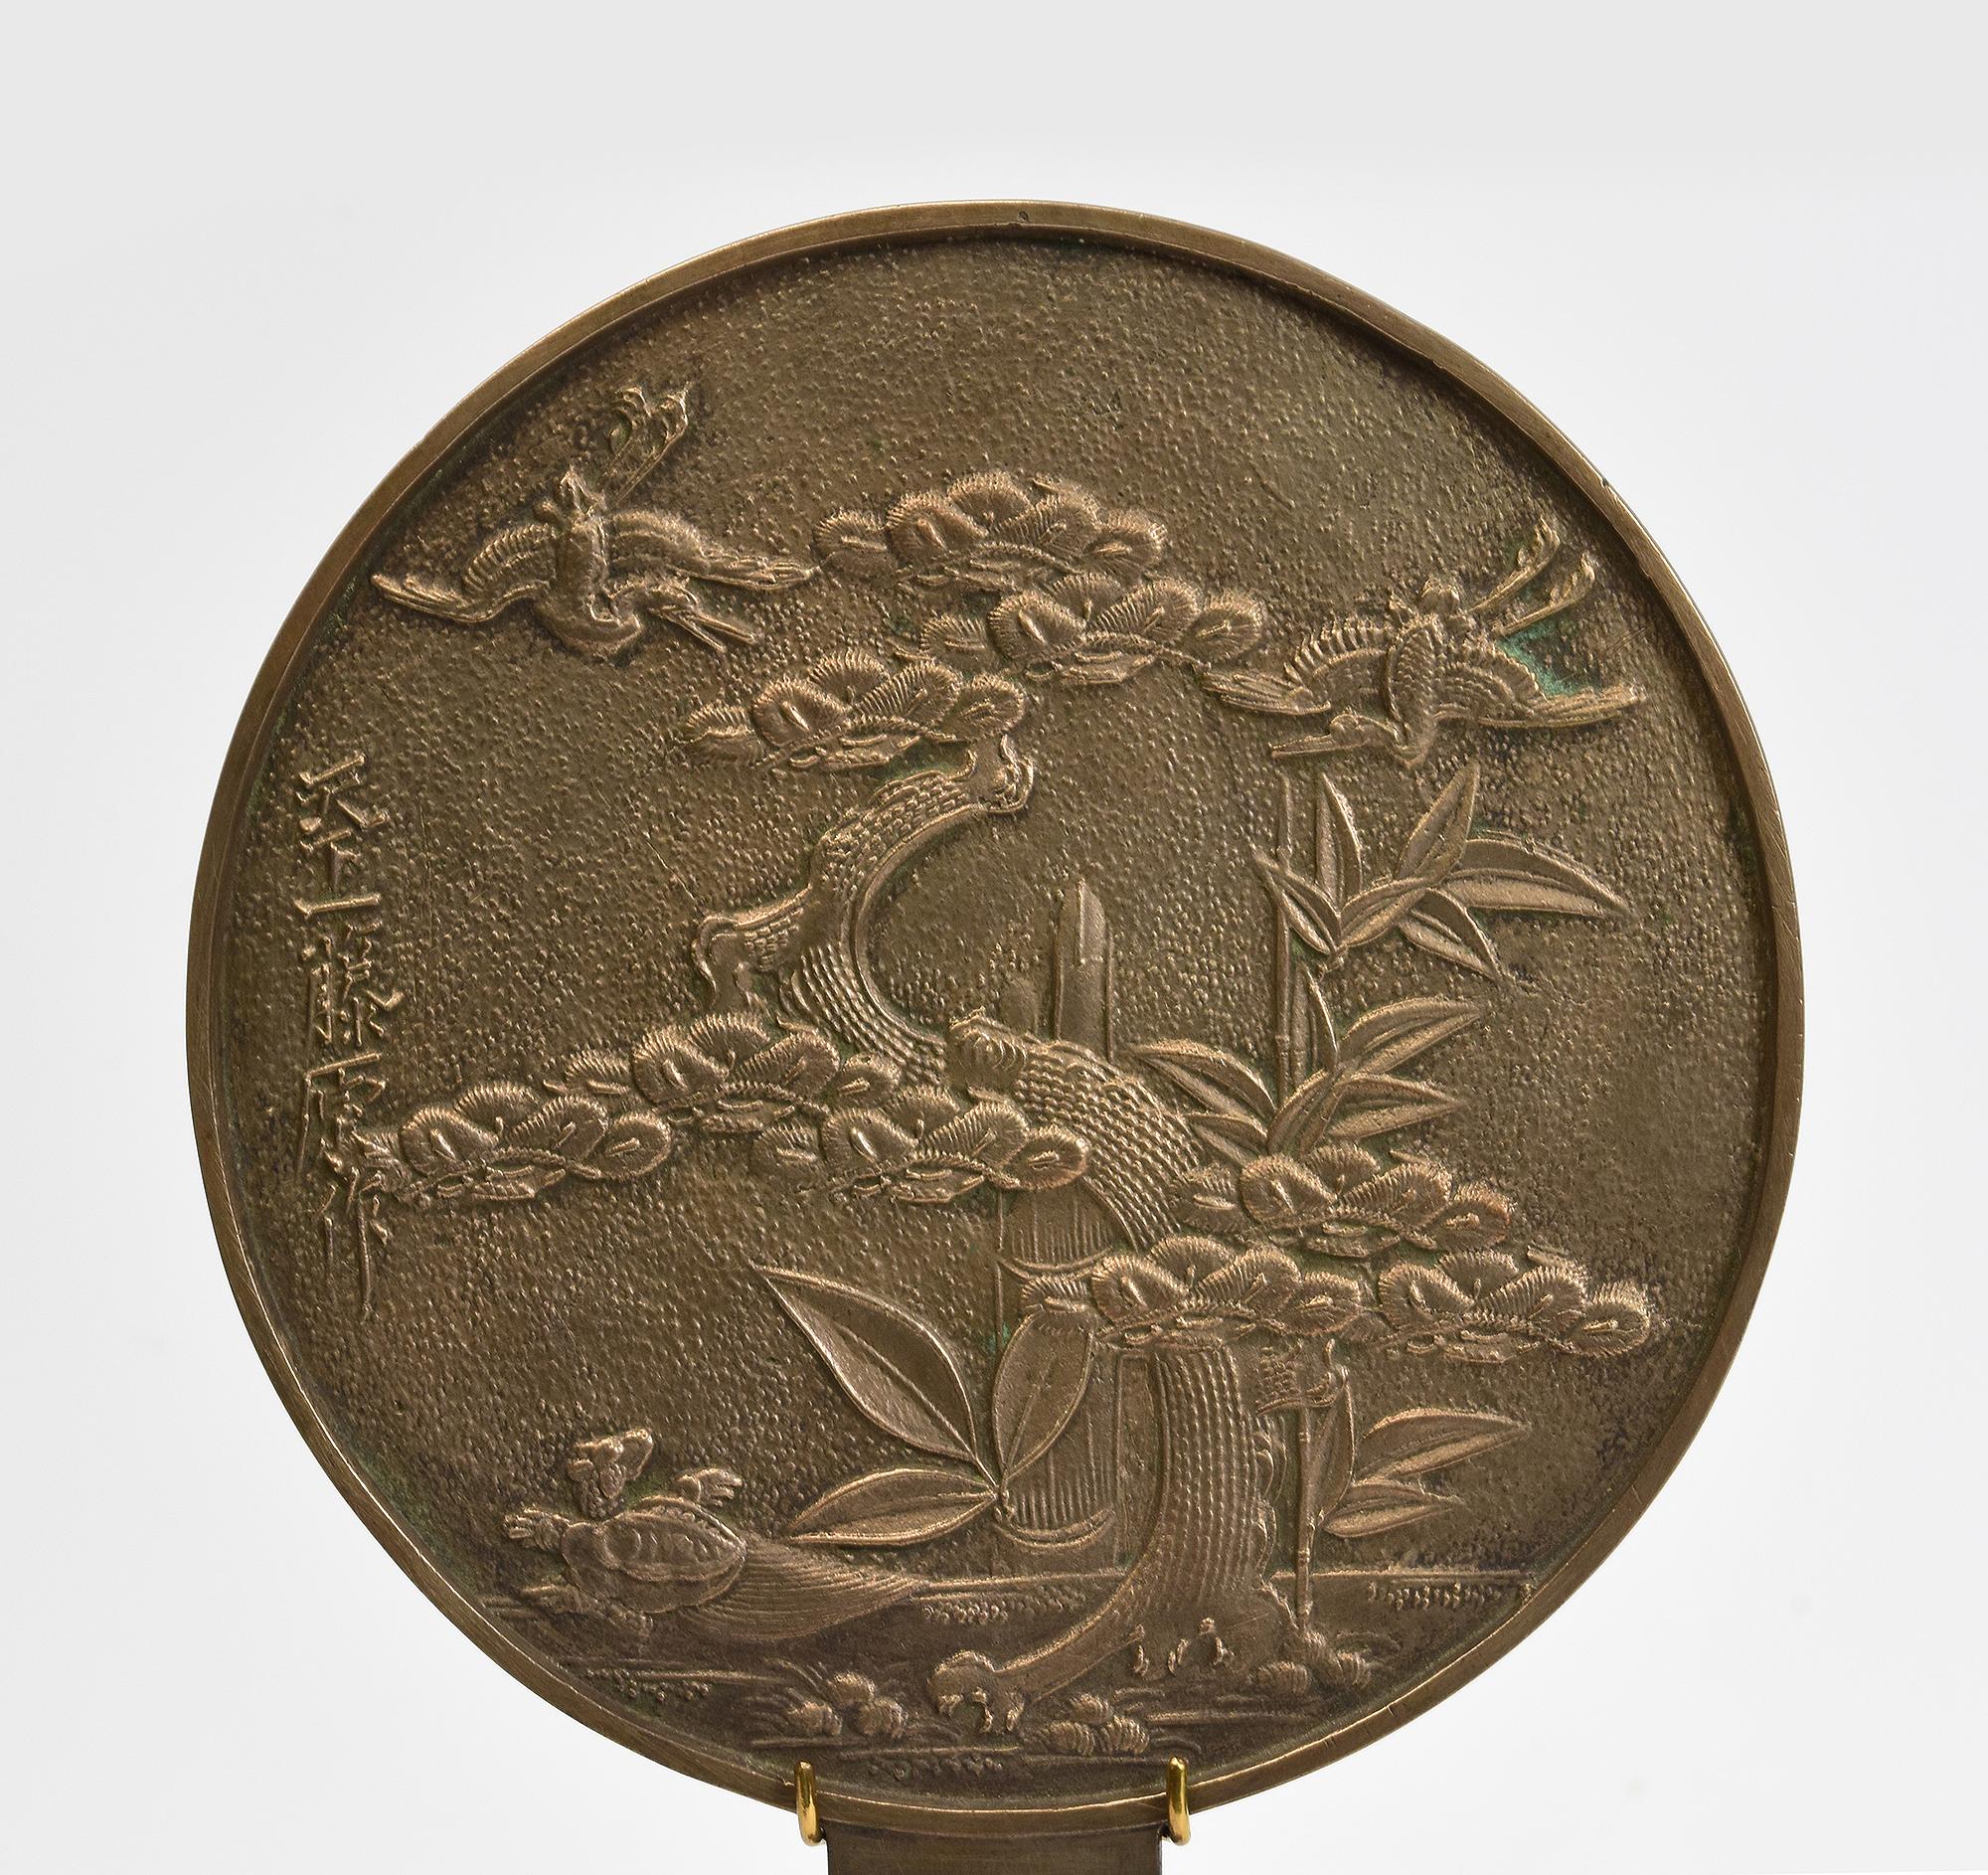 Japanese bronze mirror with stand.

Age: Japan, Showa Period, Early 20th Century
Size: Diameter 14.8 C.M. / Height 24.7 C.M.
Size including stand: Height 34 C.M.
Condition: Nice condition overall.